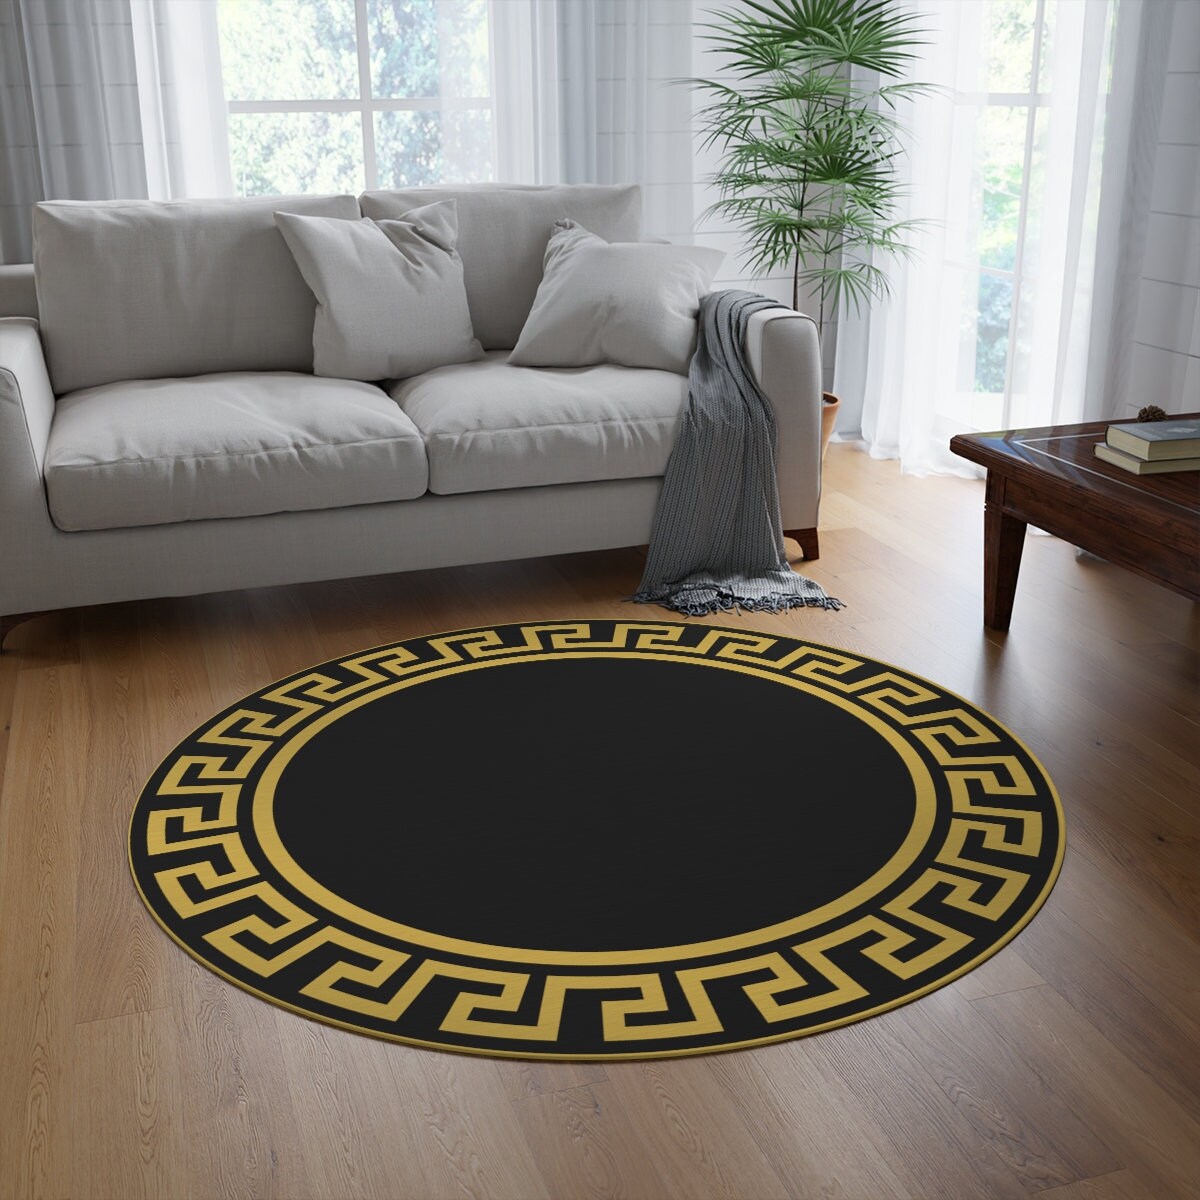 5X5 Black Fluffy Round Rug for Living Room Luxurious Circle Carpet for  Bedroom Shaggy Plush Soft Grey Round Rug Home Decoration Carpets (5x5,  Black)